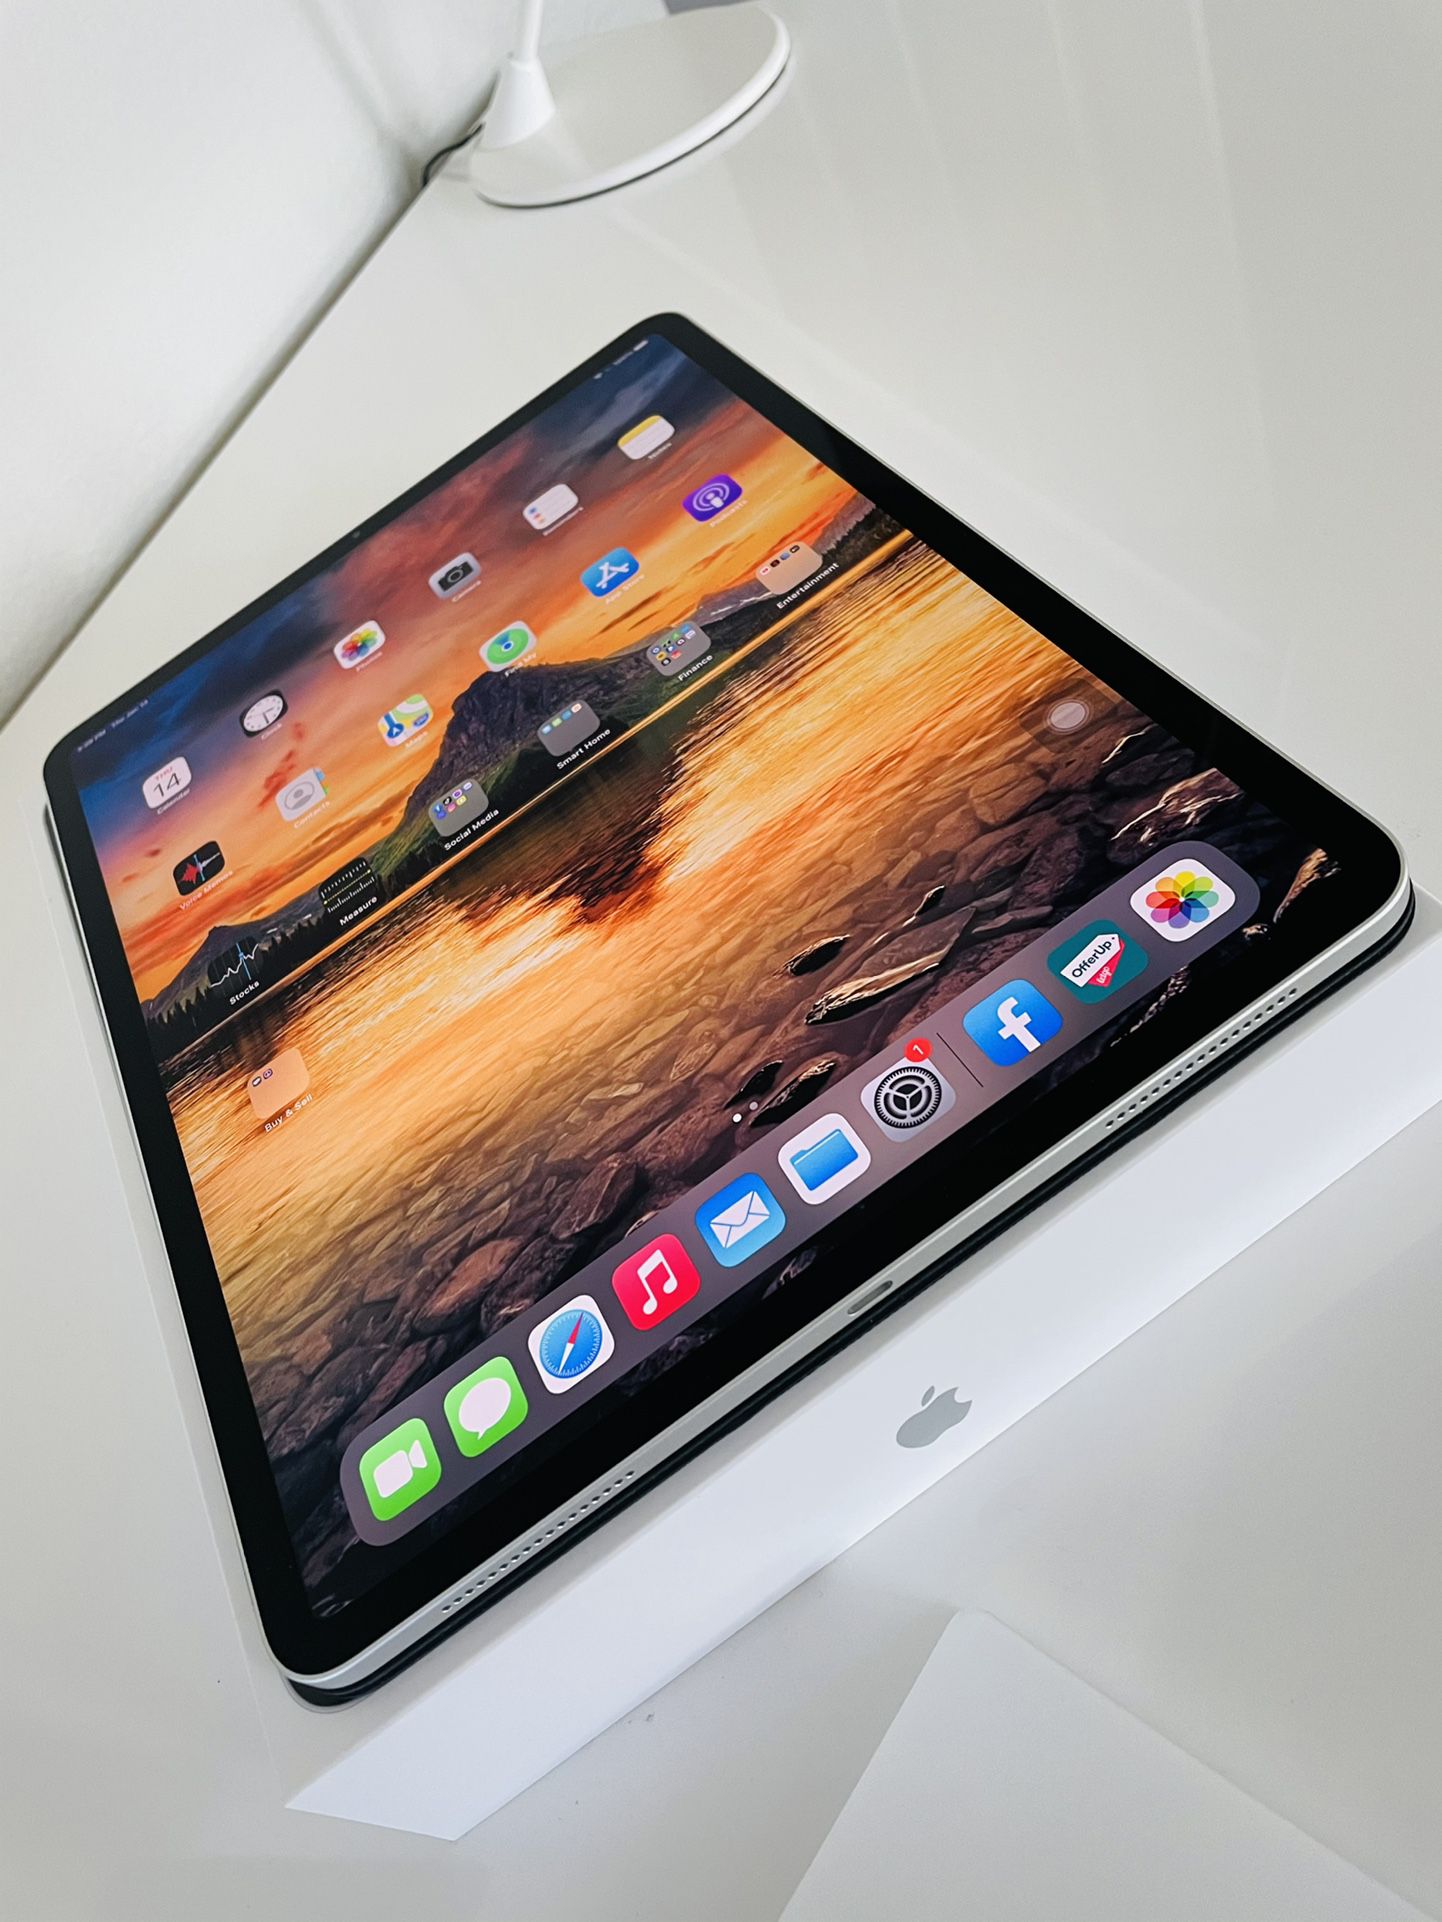 Apple iPad Pro 12.9 64Gb WiFi+cell (3rd Gen) And Wireless Keyboard ! Immaculate Condition ! No Box , Only USB Charging Cable 